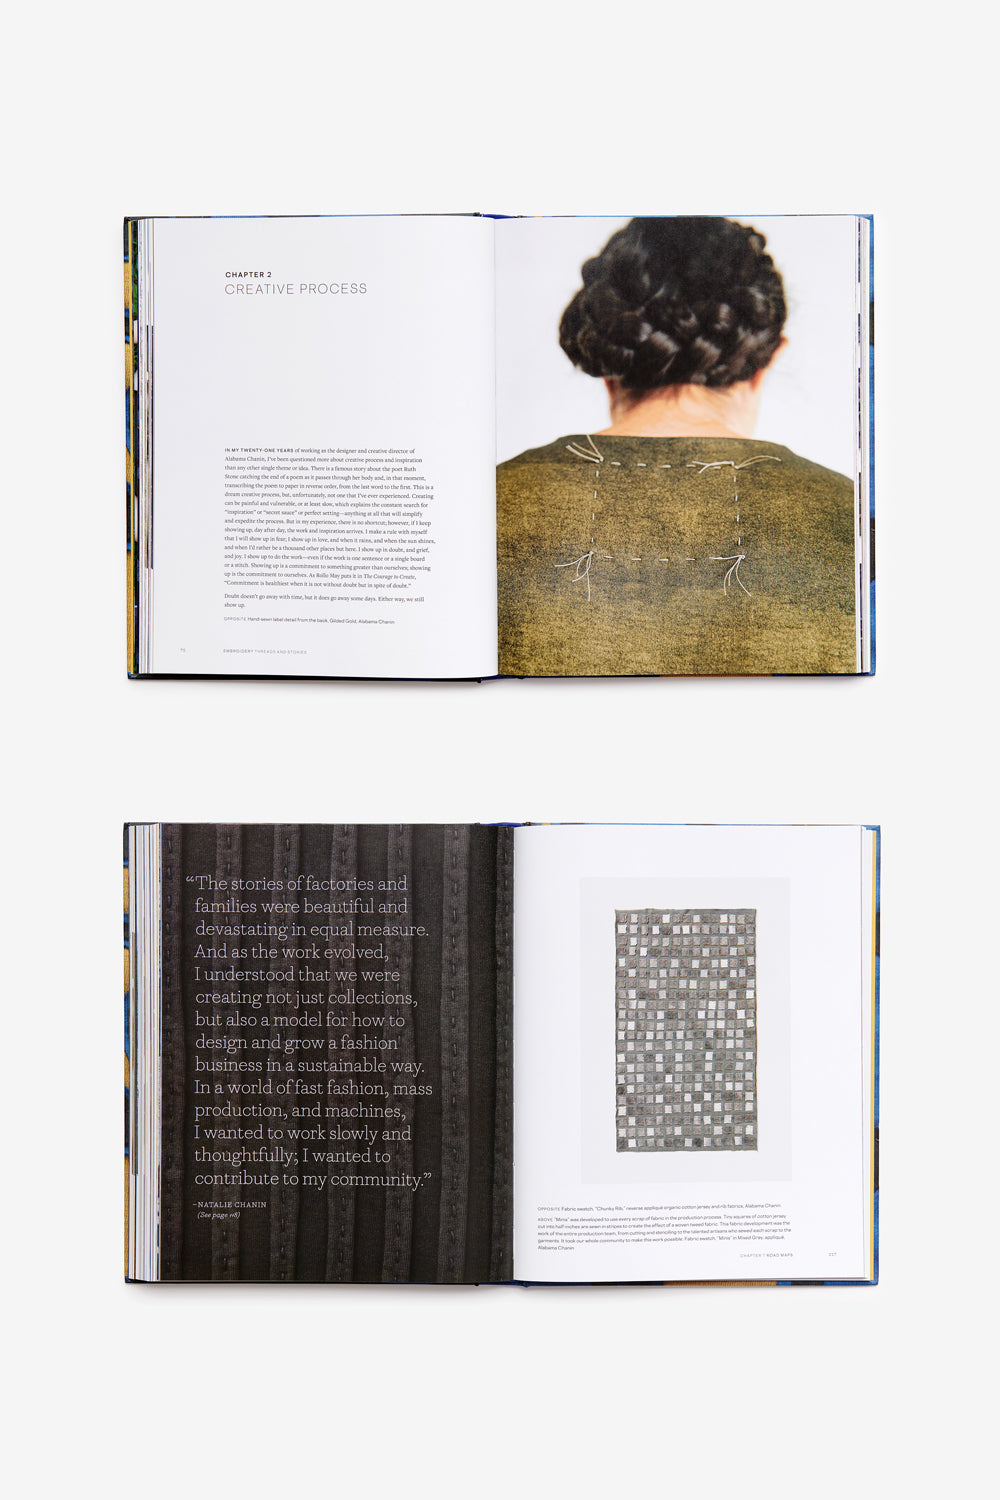 Embroidery: Threads and Stories, a book by Natalie Chanin.